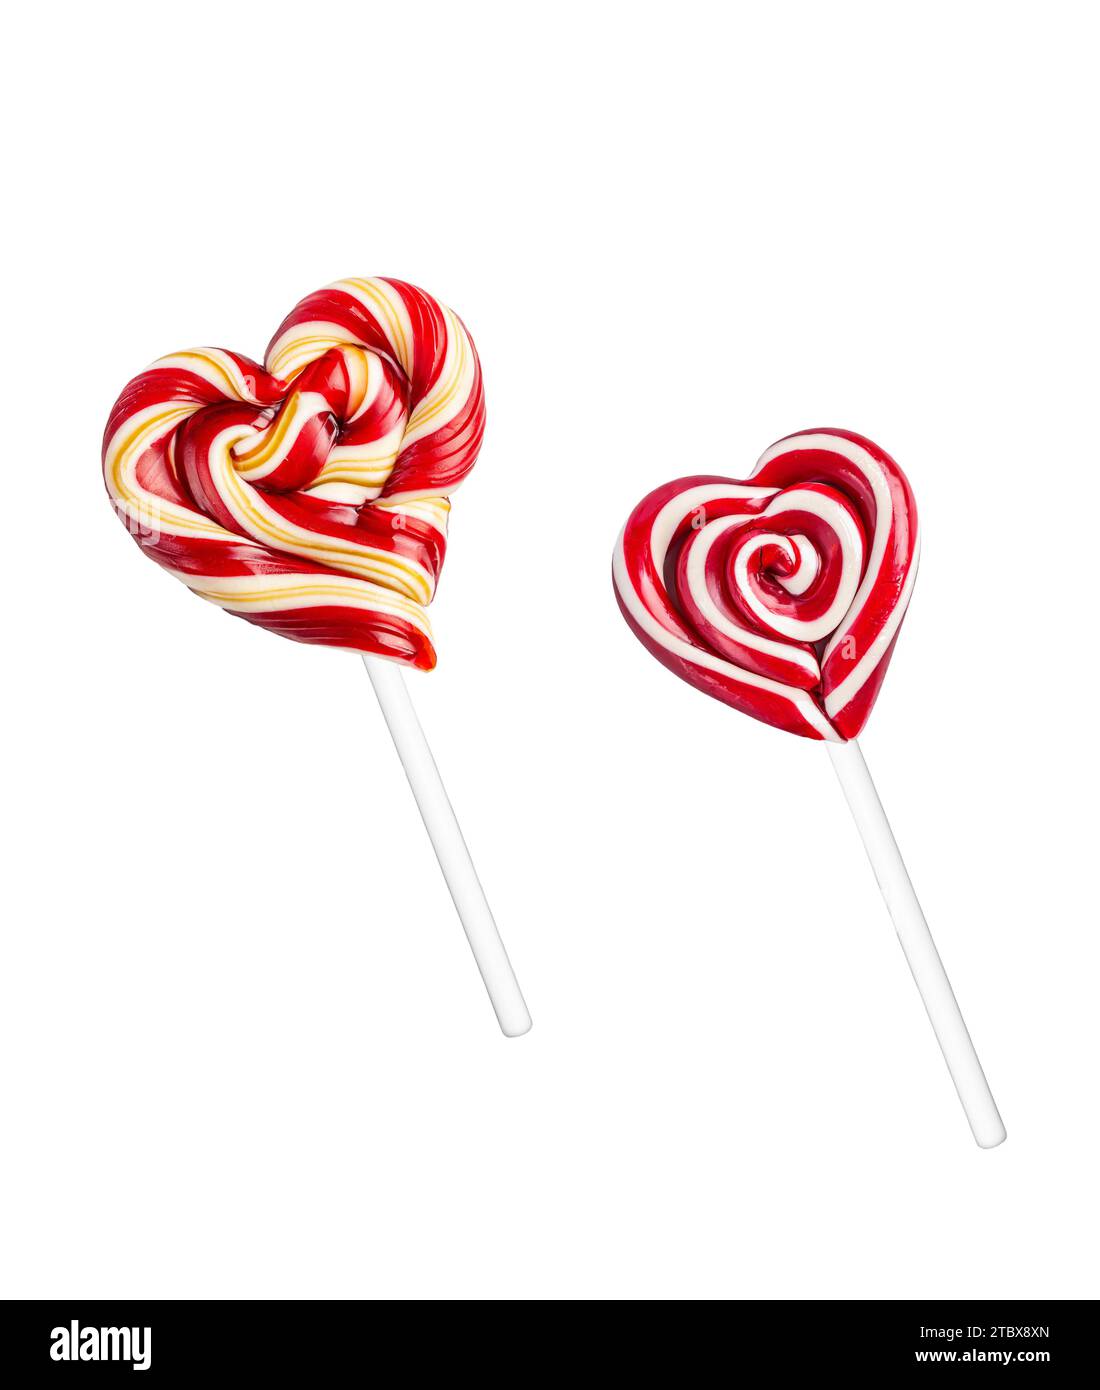 Two Types of Heart Shaped Red and White Swirl Lollipops on White Backdrop Stock Photo